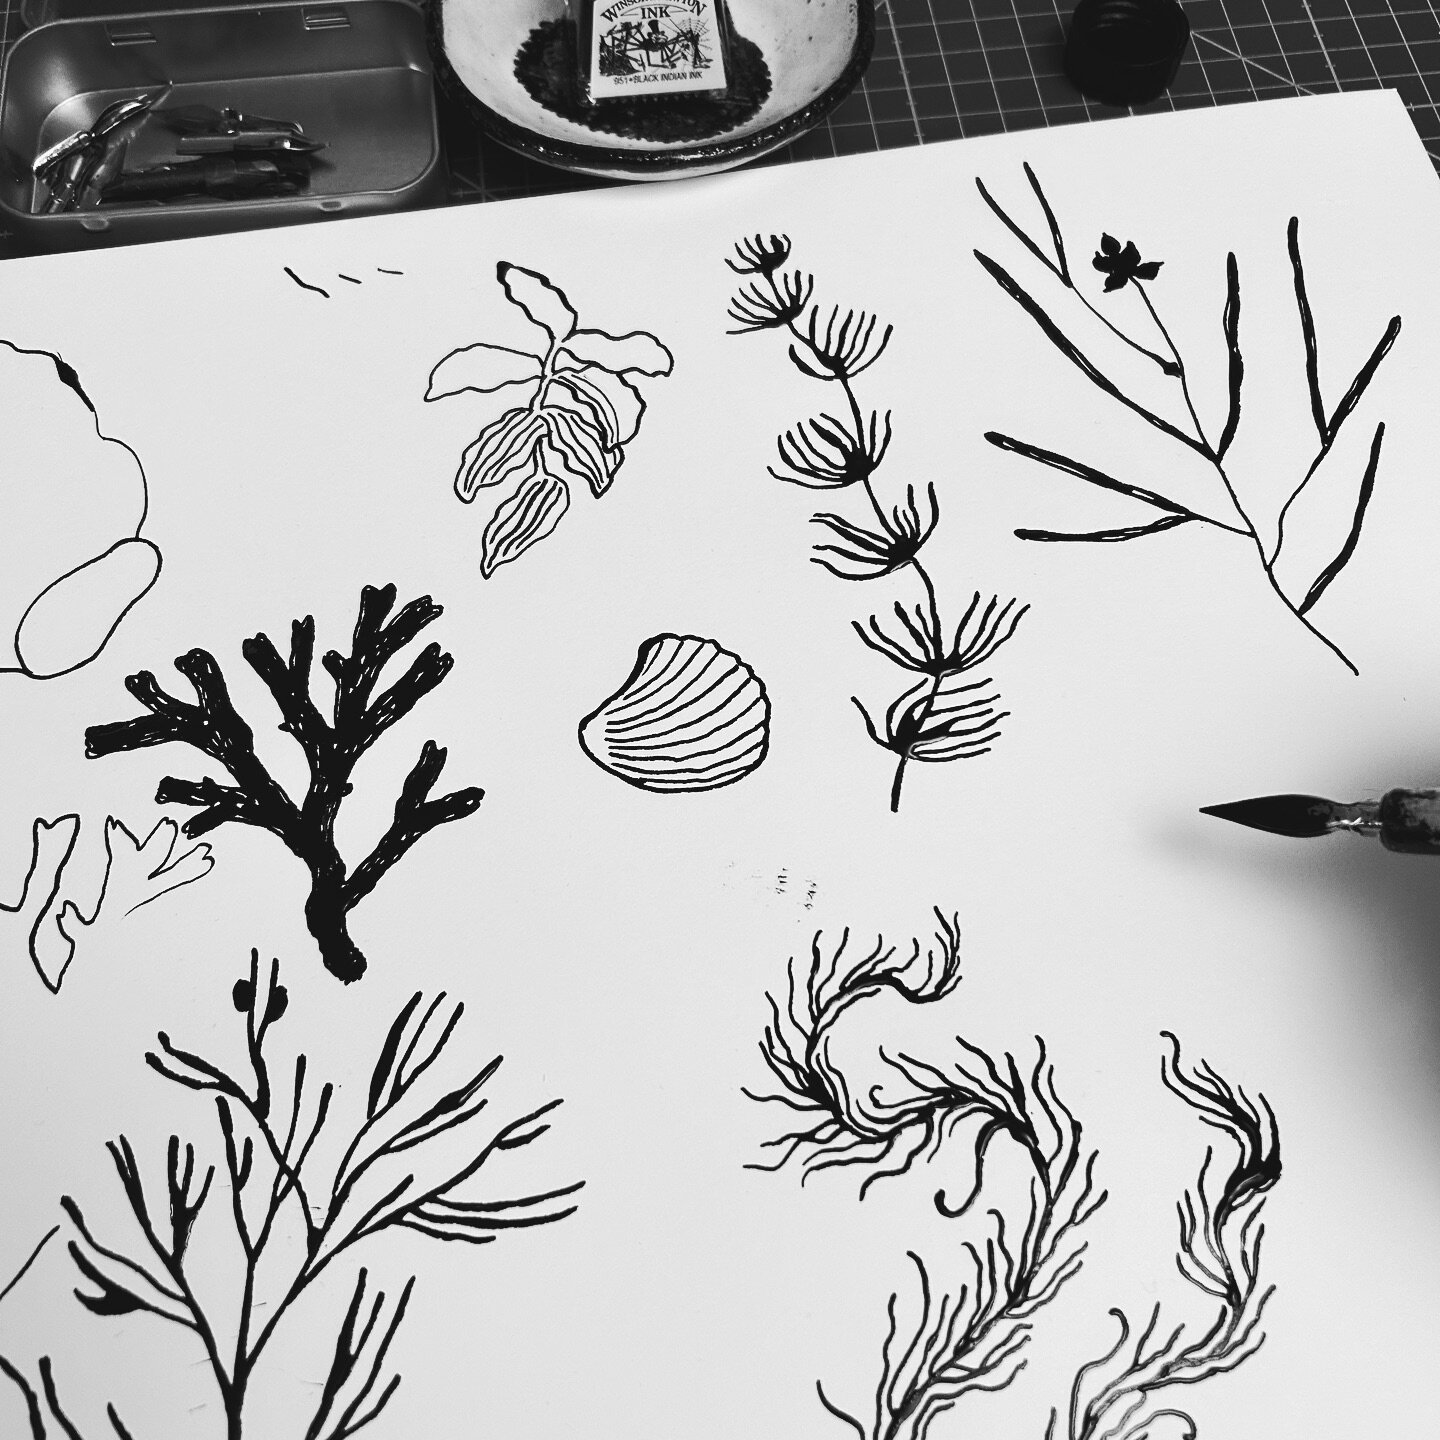 I took out my ink and dip pen after a long while and had so much fun drawing some species from the Baltic Sea 🪸
🪸
#inkdrawing #dippendrawing #dippenandink #mustepiirustus #it&auml;meri #kuvittaja #mustepiirros #seaweed